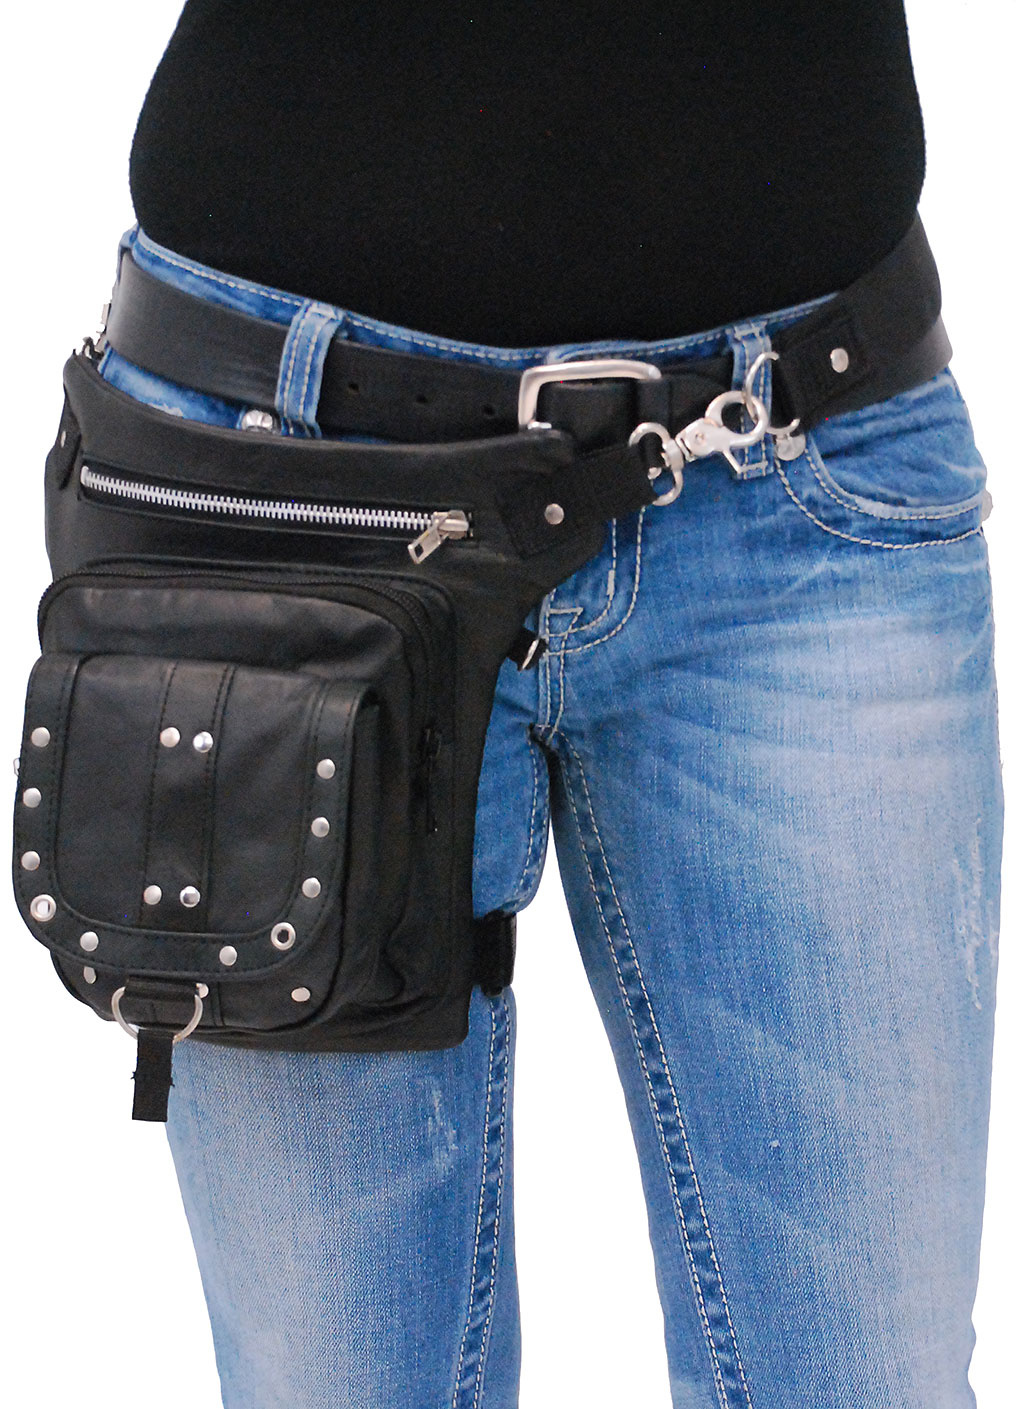 Studded Leather Thigh Bag w/Small CCW #TB351SGRK - Jamin Leather™